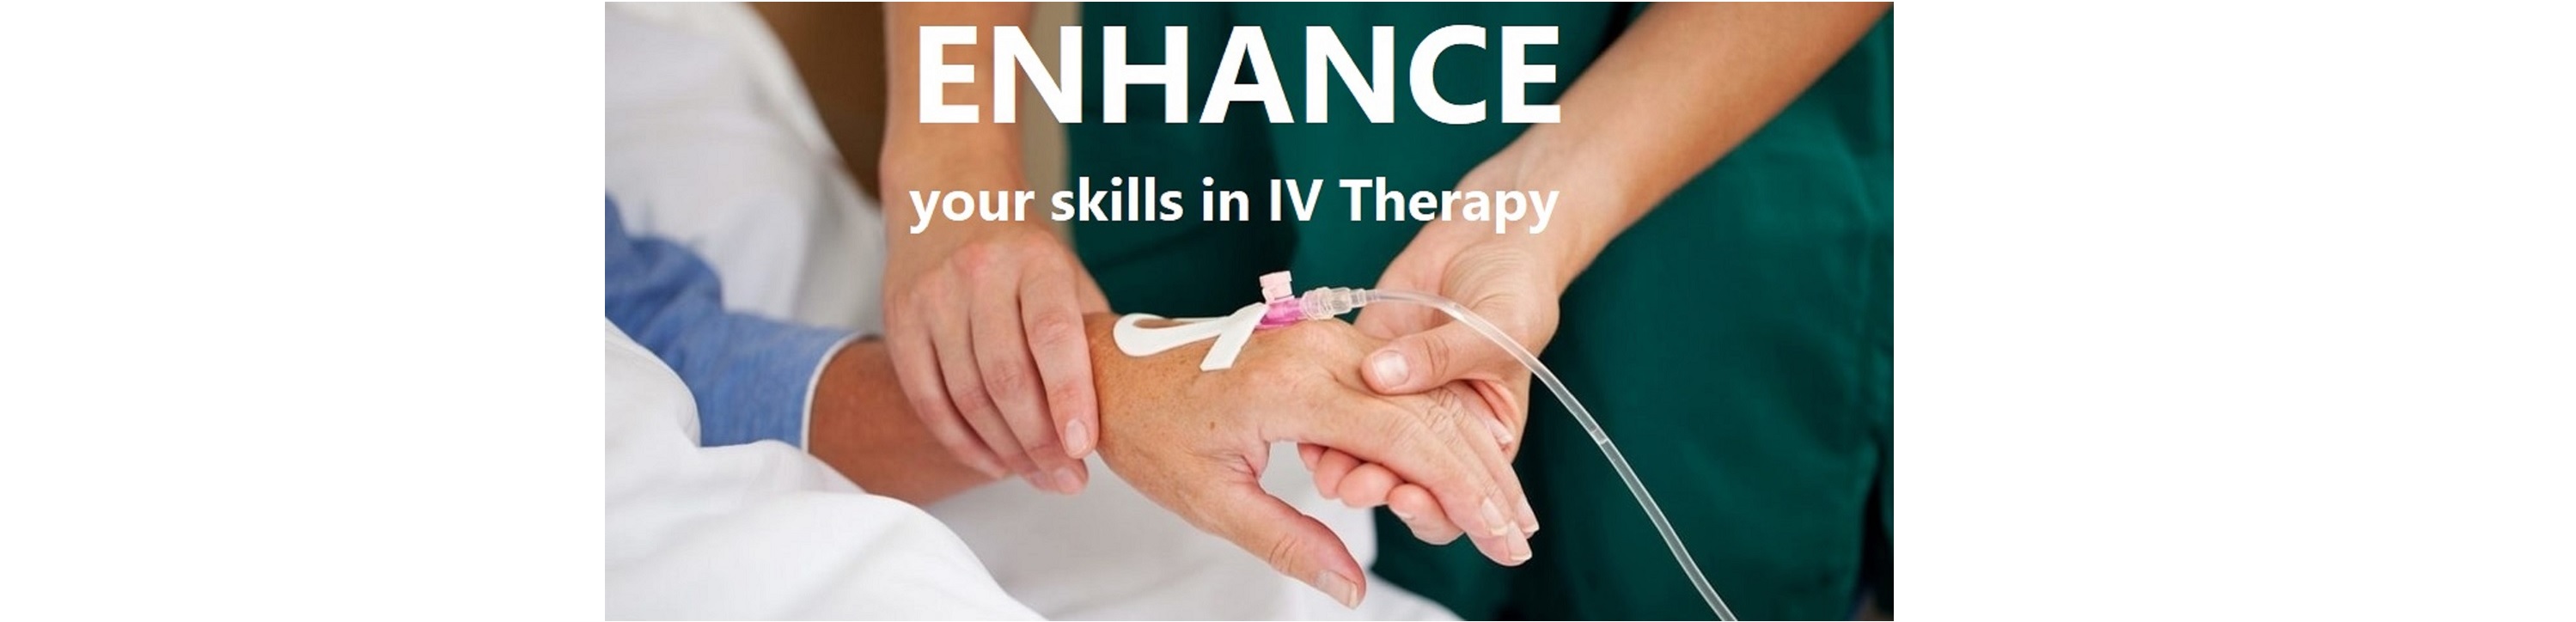 IV Therapy Training, South - December 2022 Banner